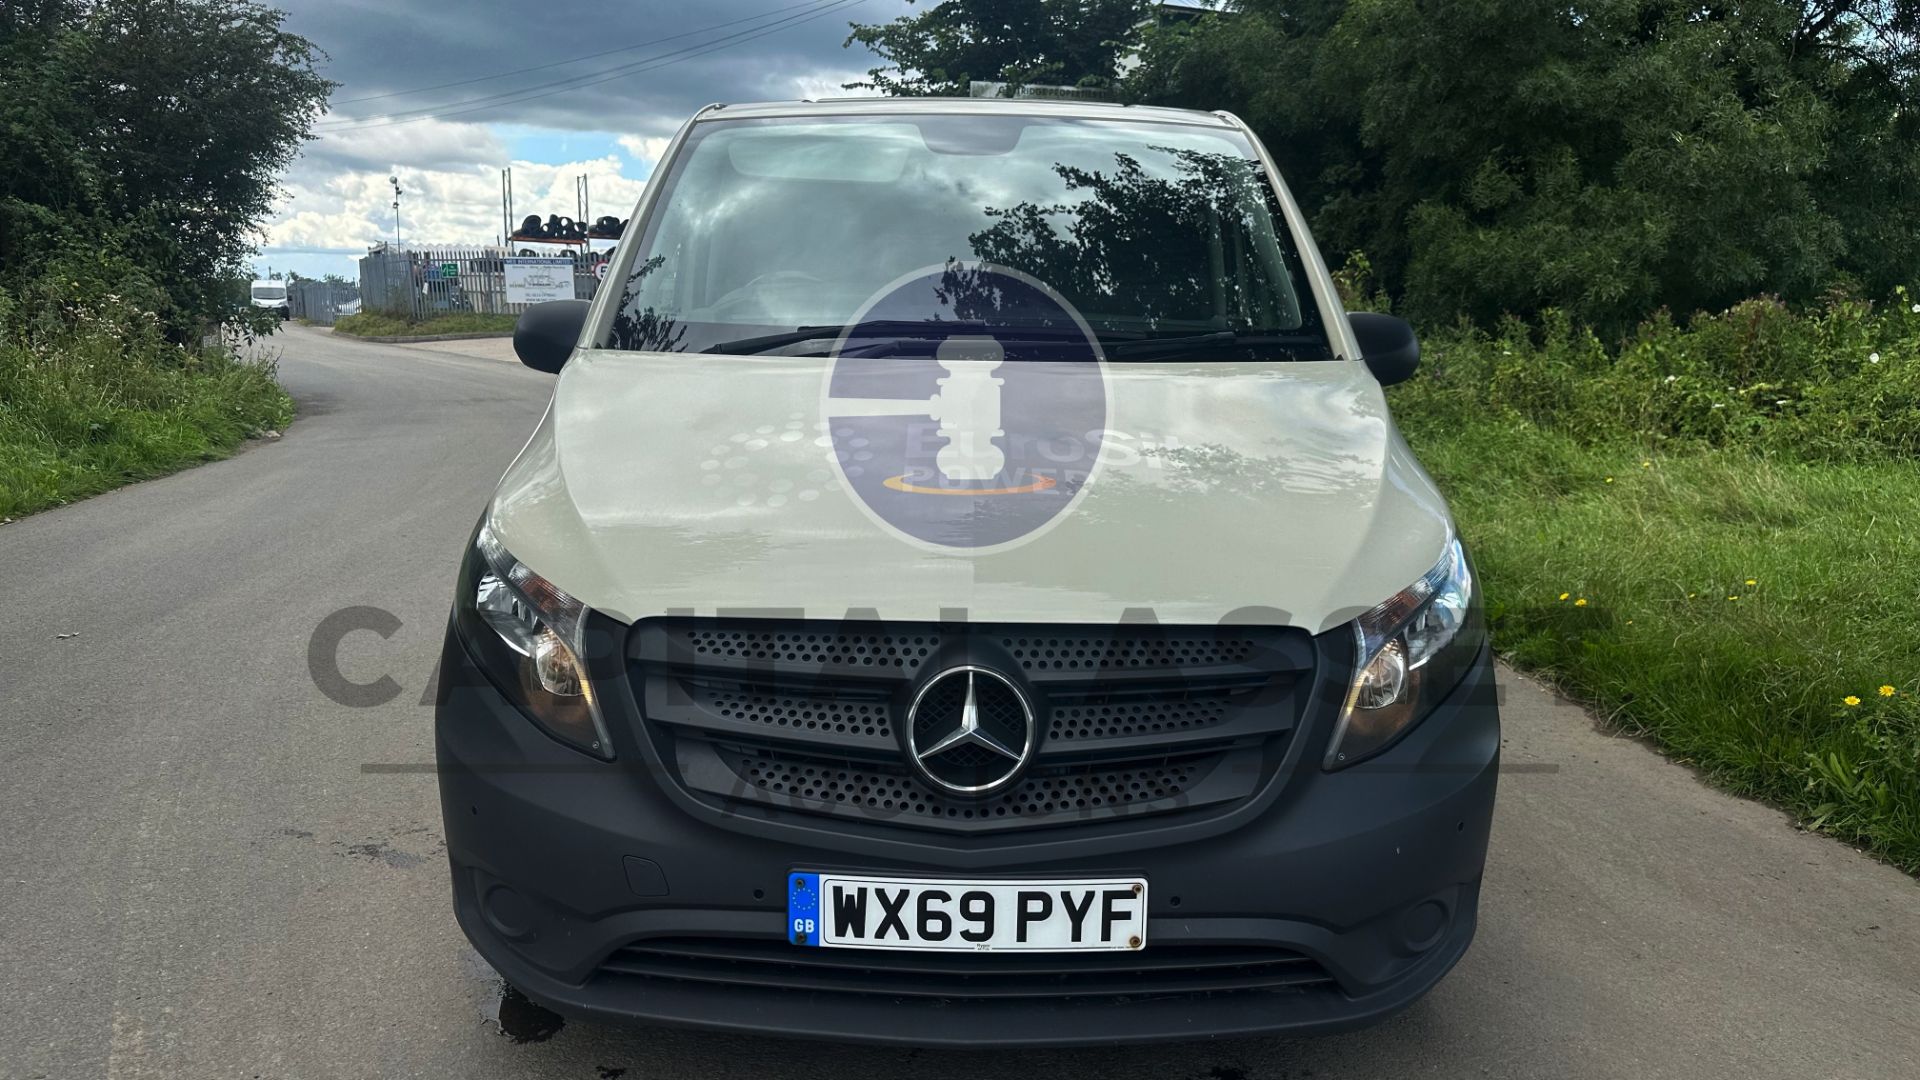 (ON SALE) MERCEDES-BENZ VITO 114 CDI *LWB - PANEL VAN* (2020) 7-G TRONIC AUTOMATIC (1 OWNER) *A/C* - Image 4 of 43